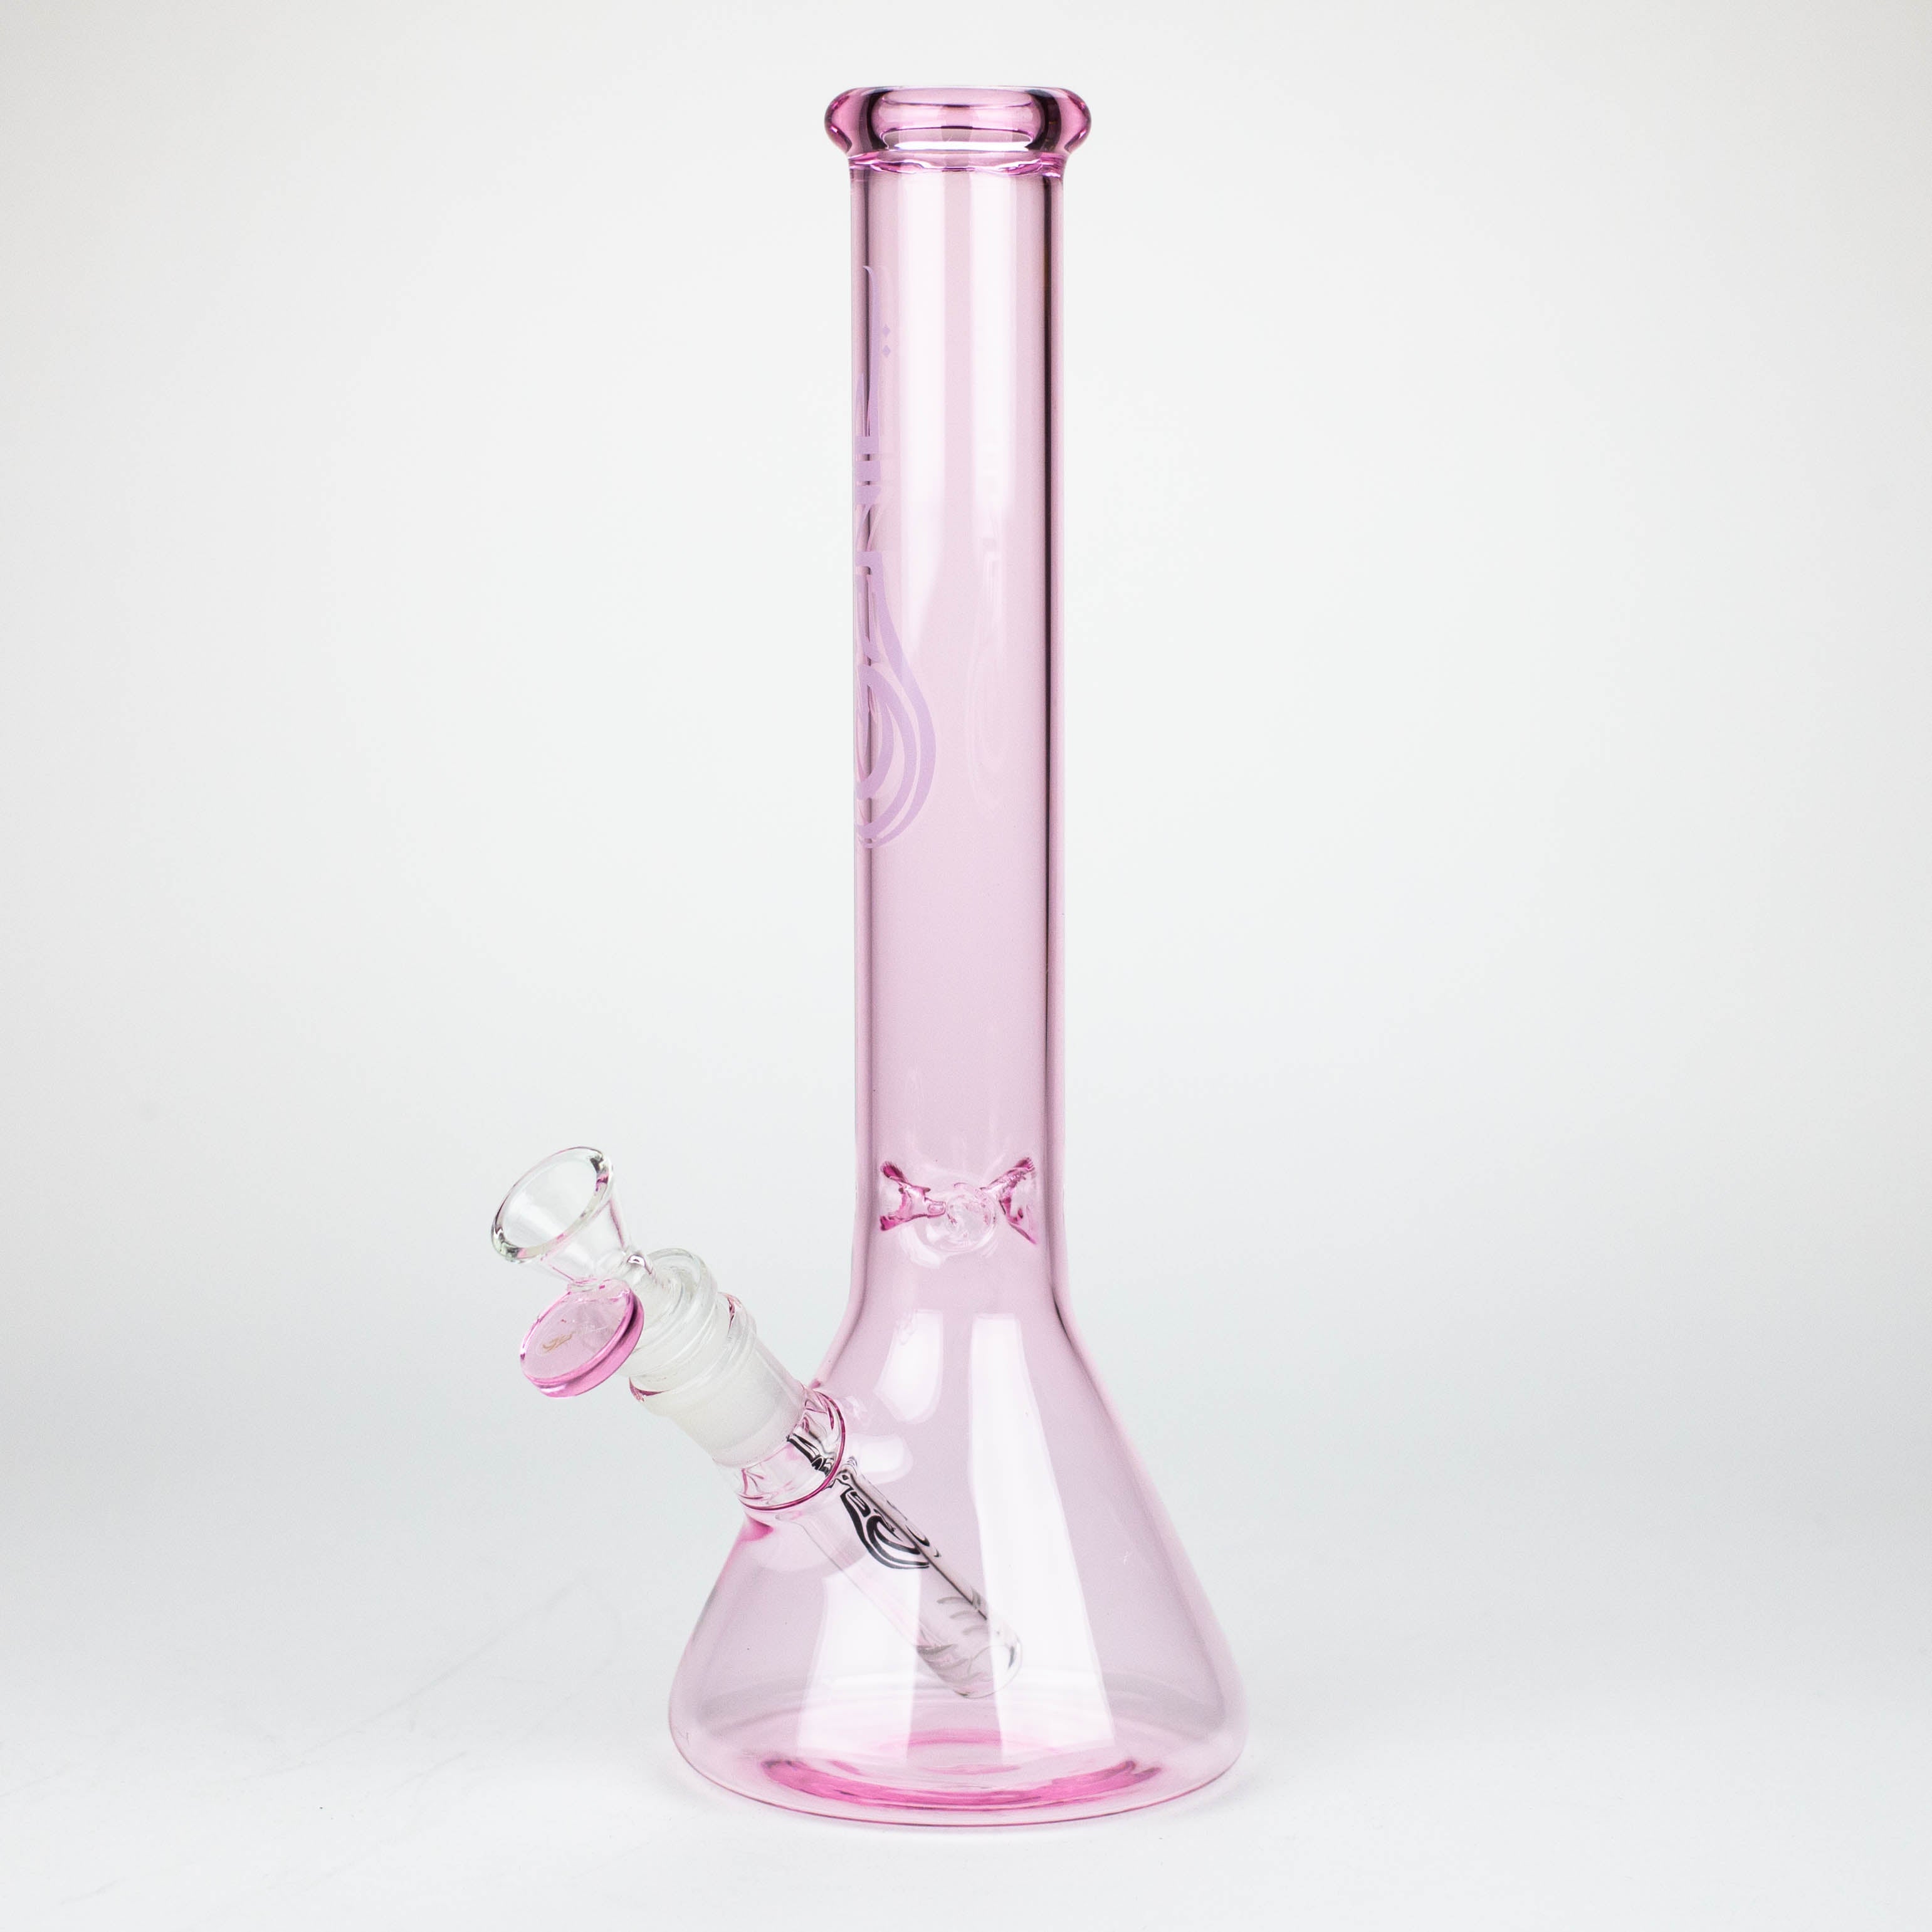 12" color tube glass water bong_5